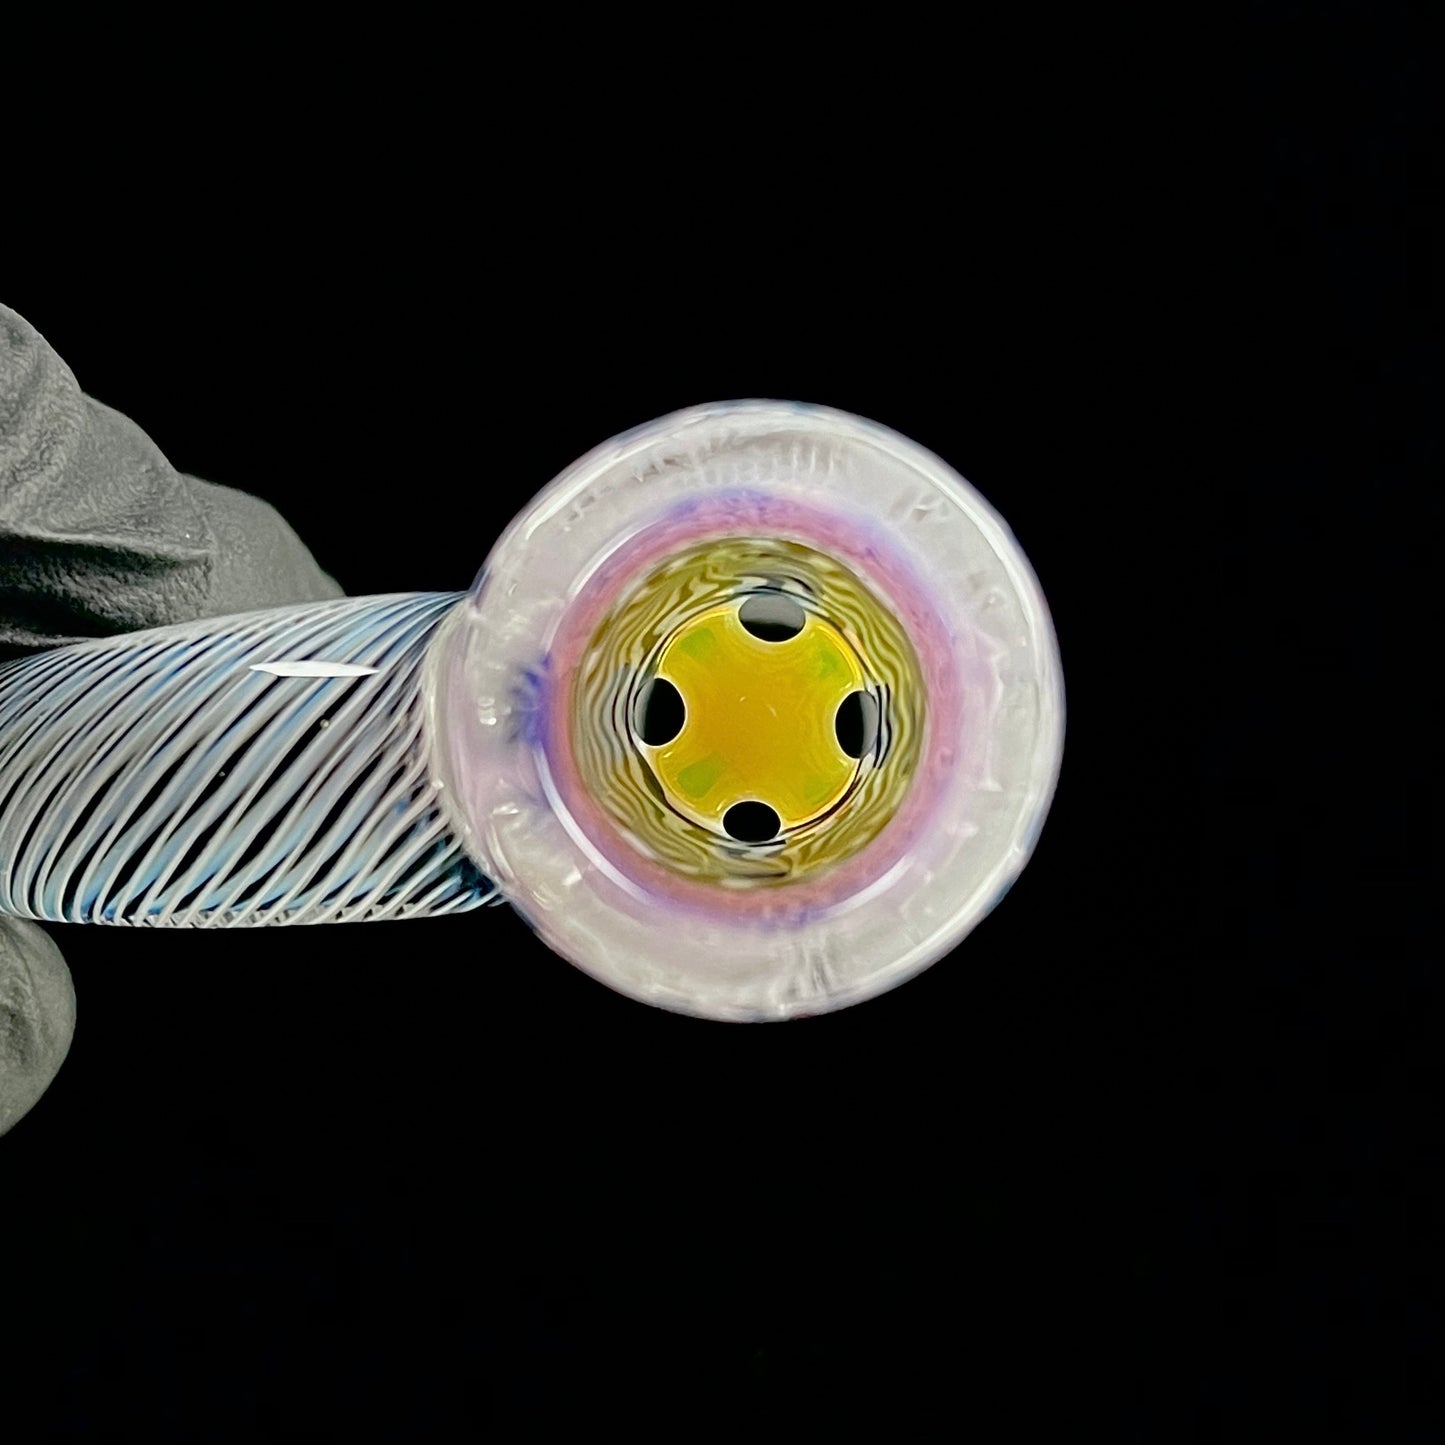 18mm White Hypnotech slide by Jared Wetmore